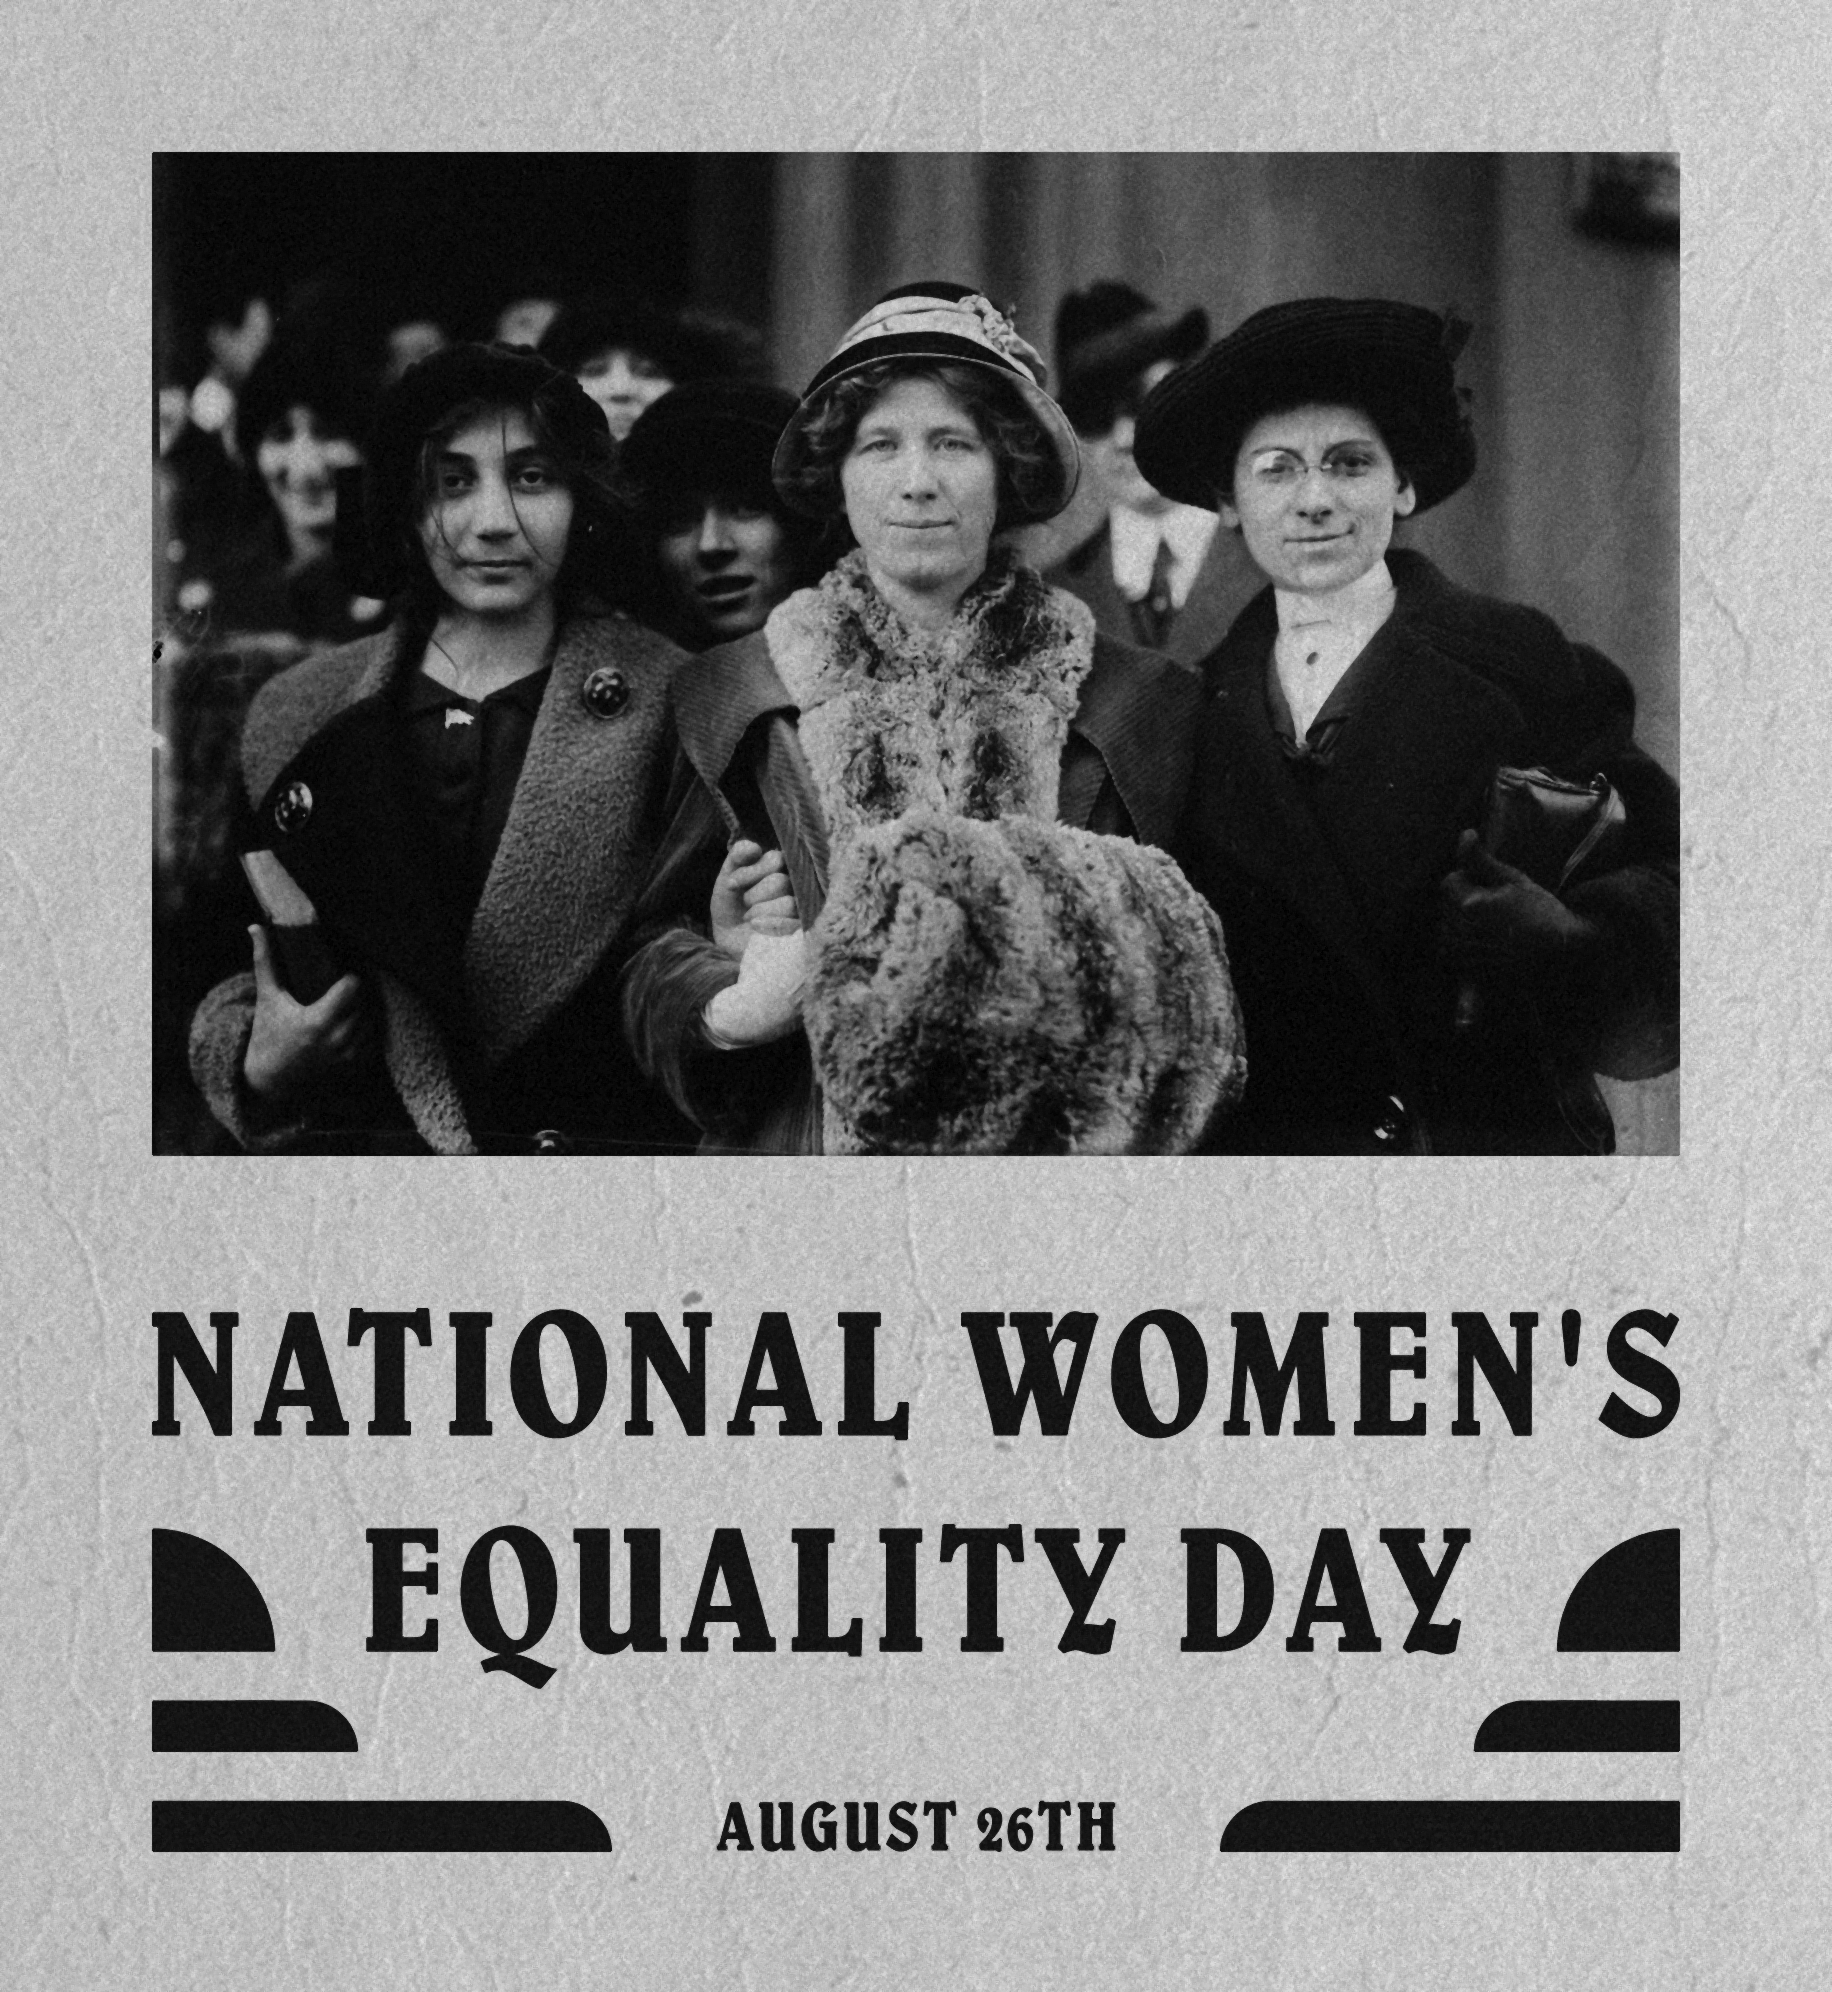 National Equality - Doing More Today